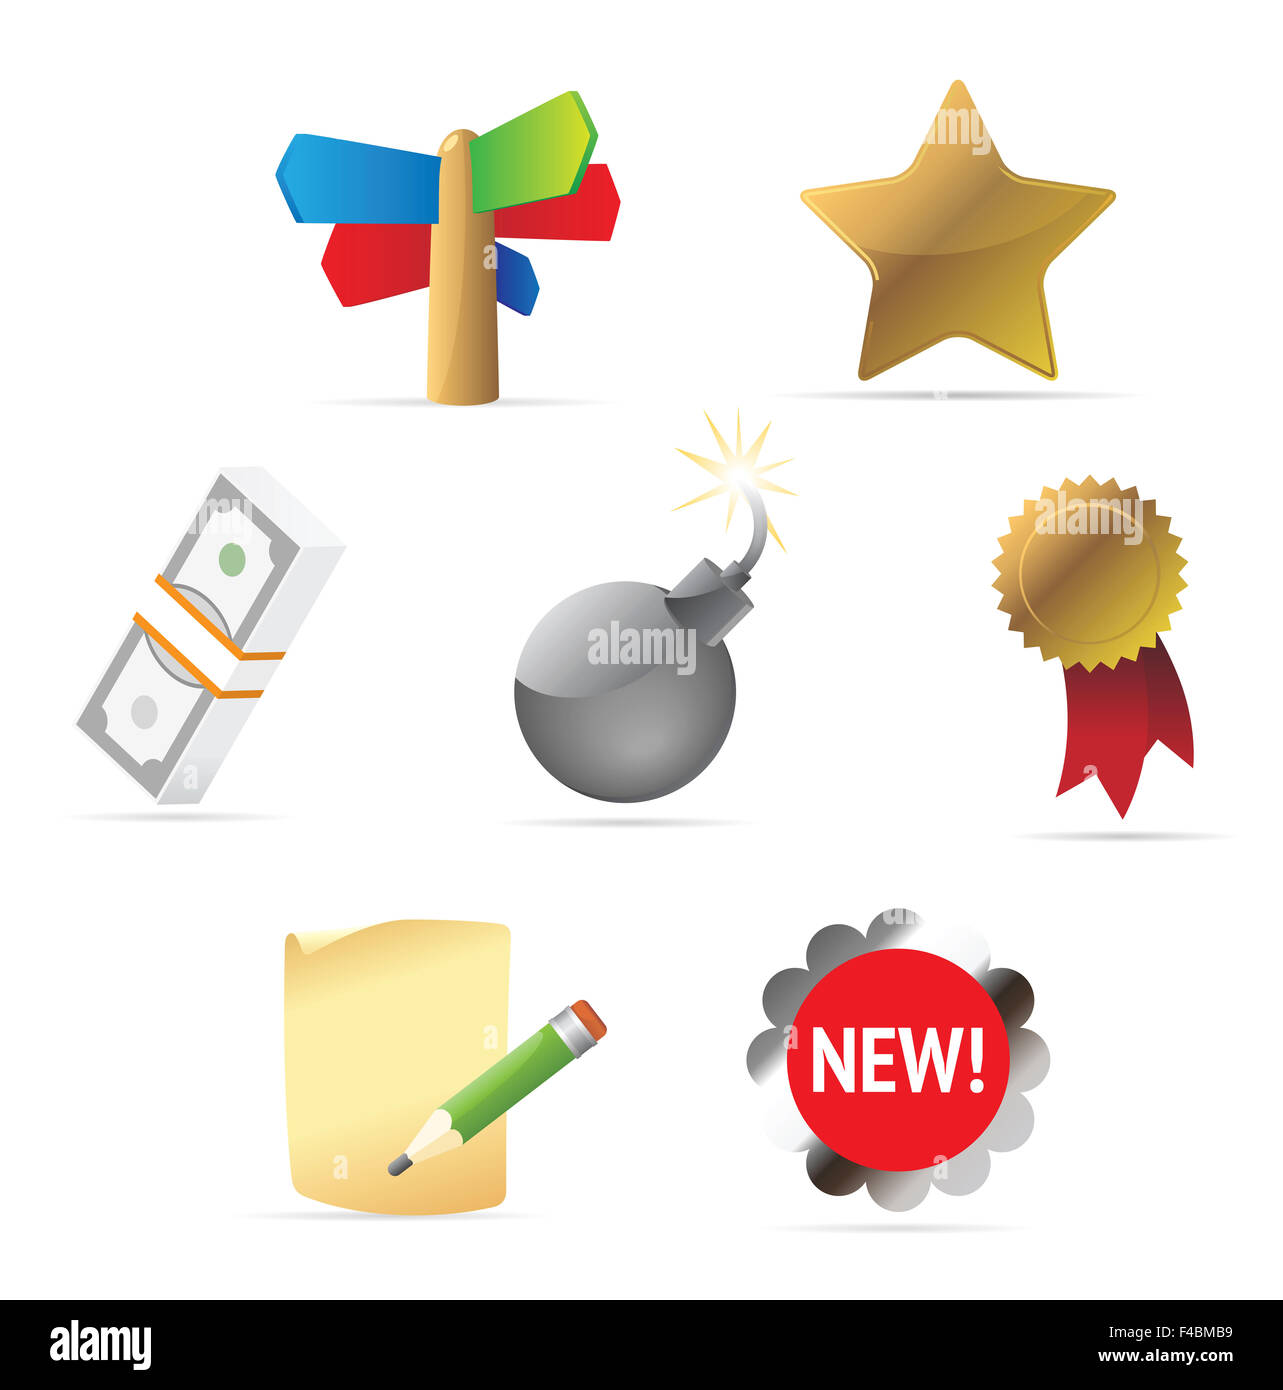 Icons for business metaphor Stock Photo